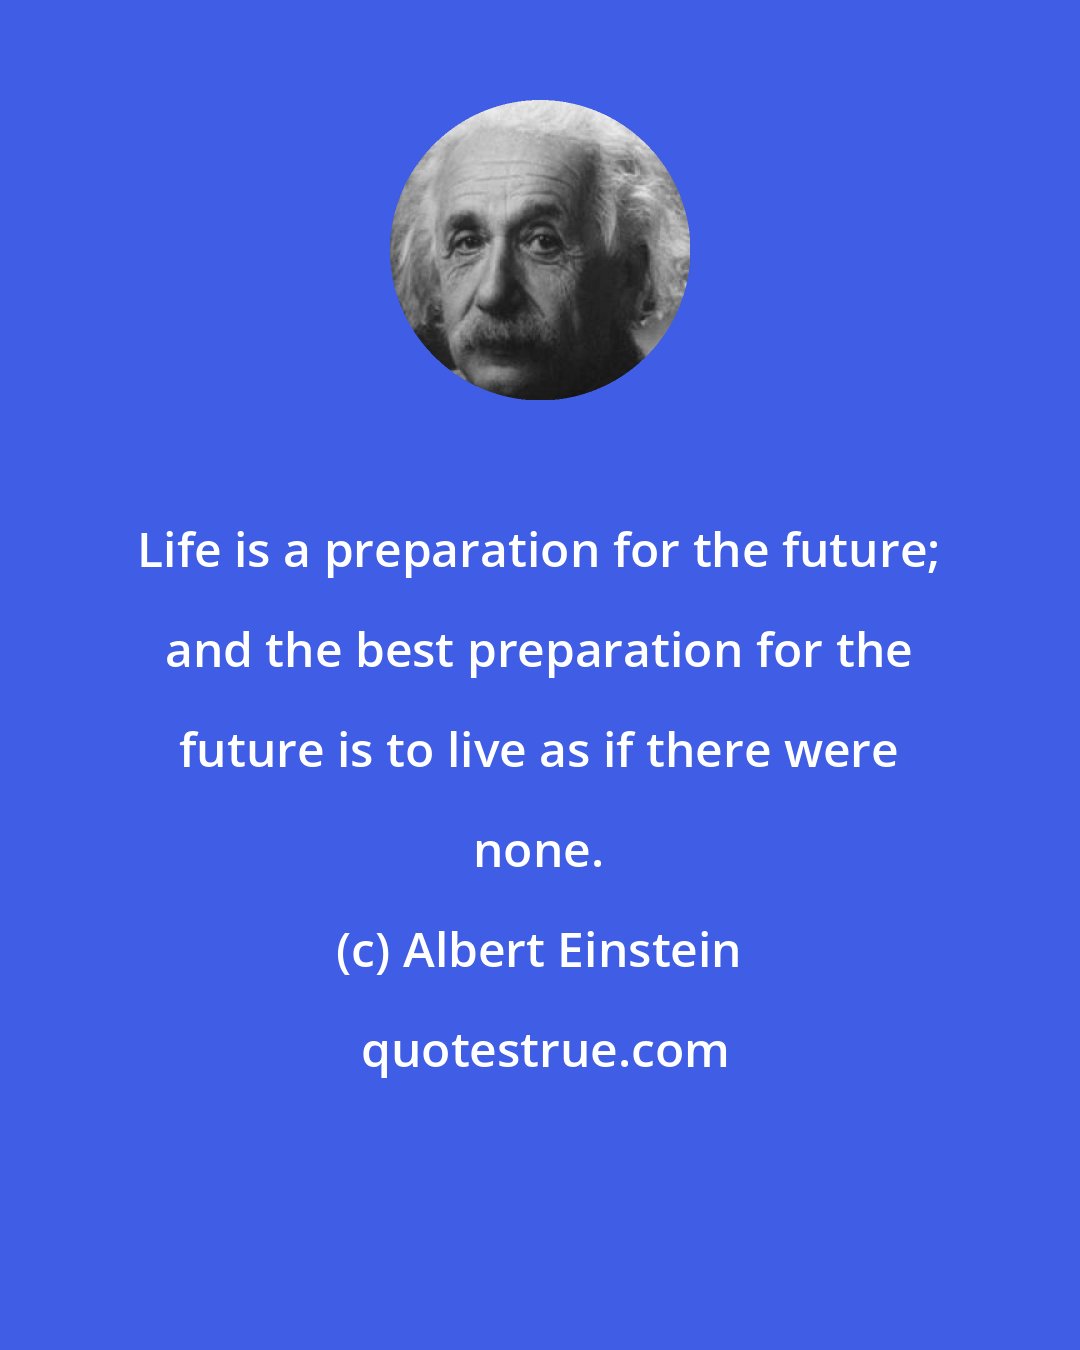 Albert Einstein: Life is a preparation for the future; and the best preparation for the future is to live as if there were none.